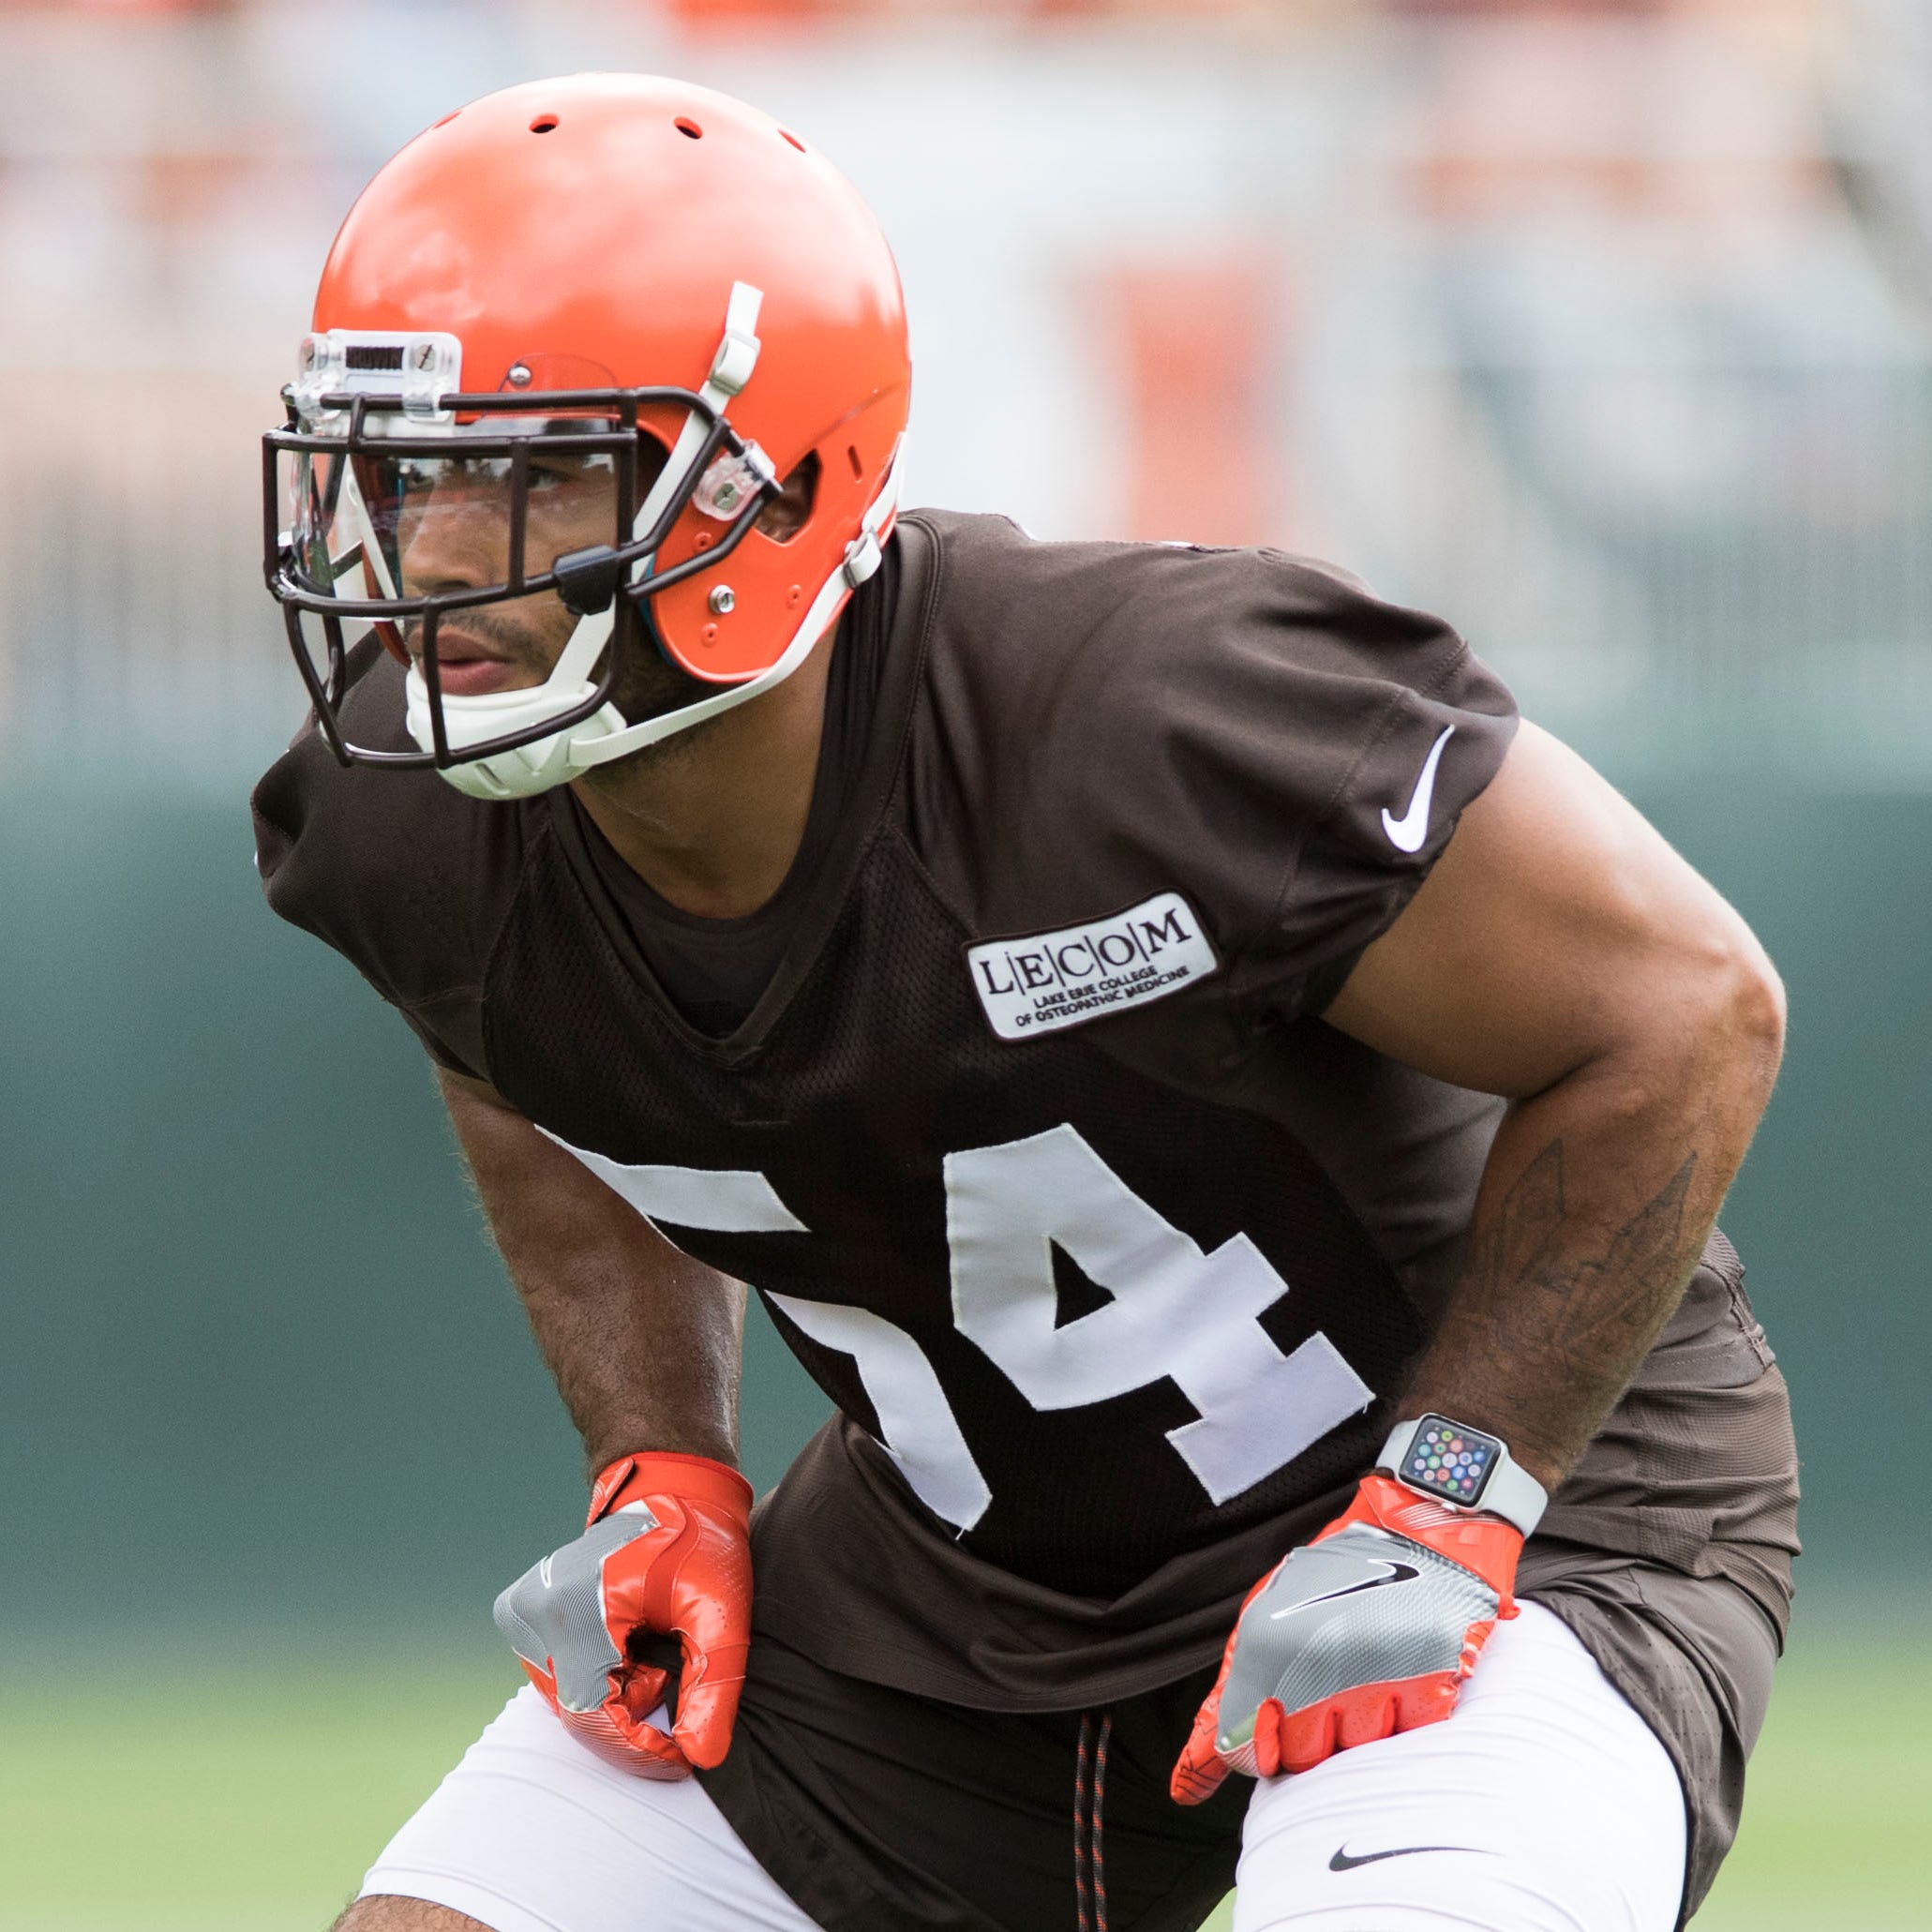 Mychal Kendricks was signed as a free agent this summer by the Browns.